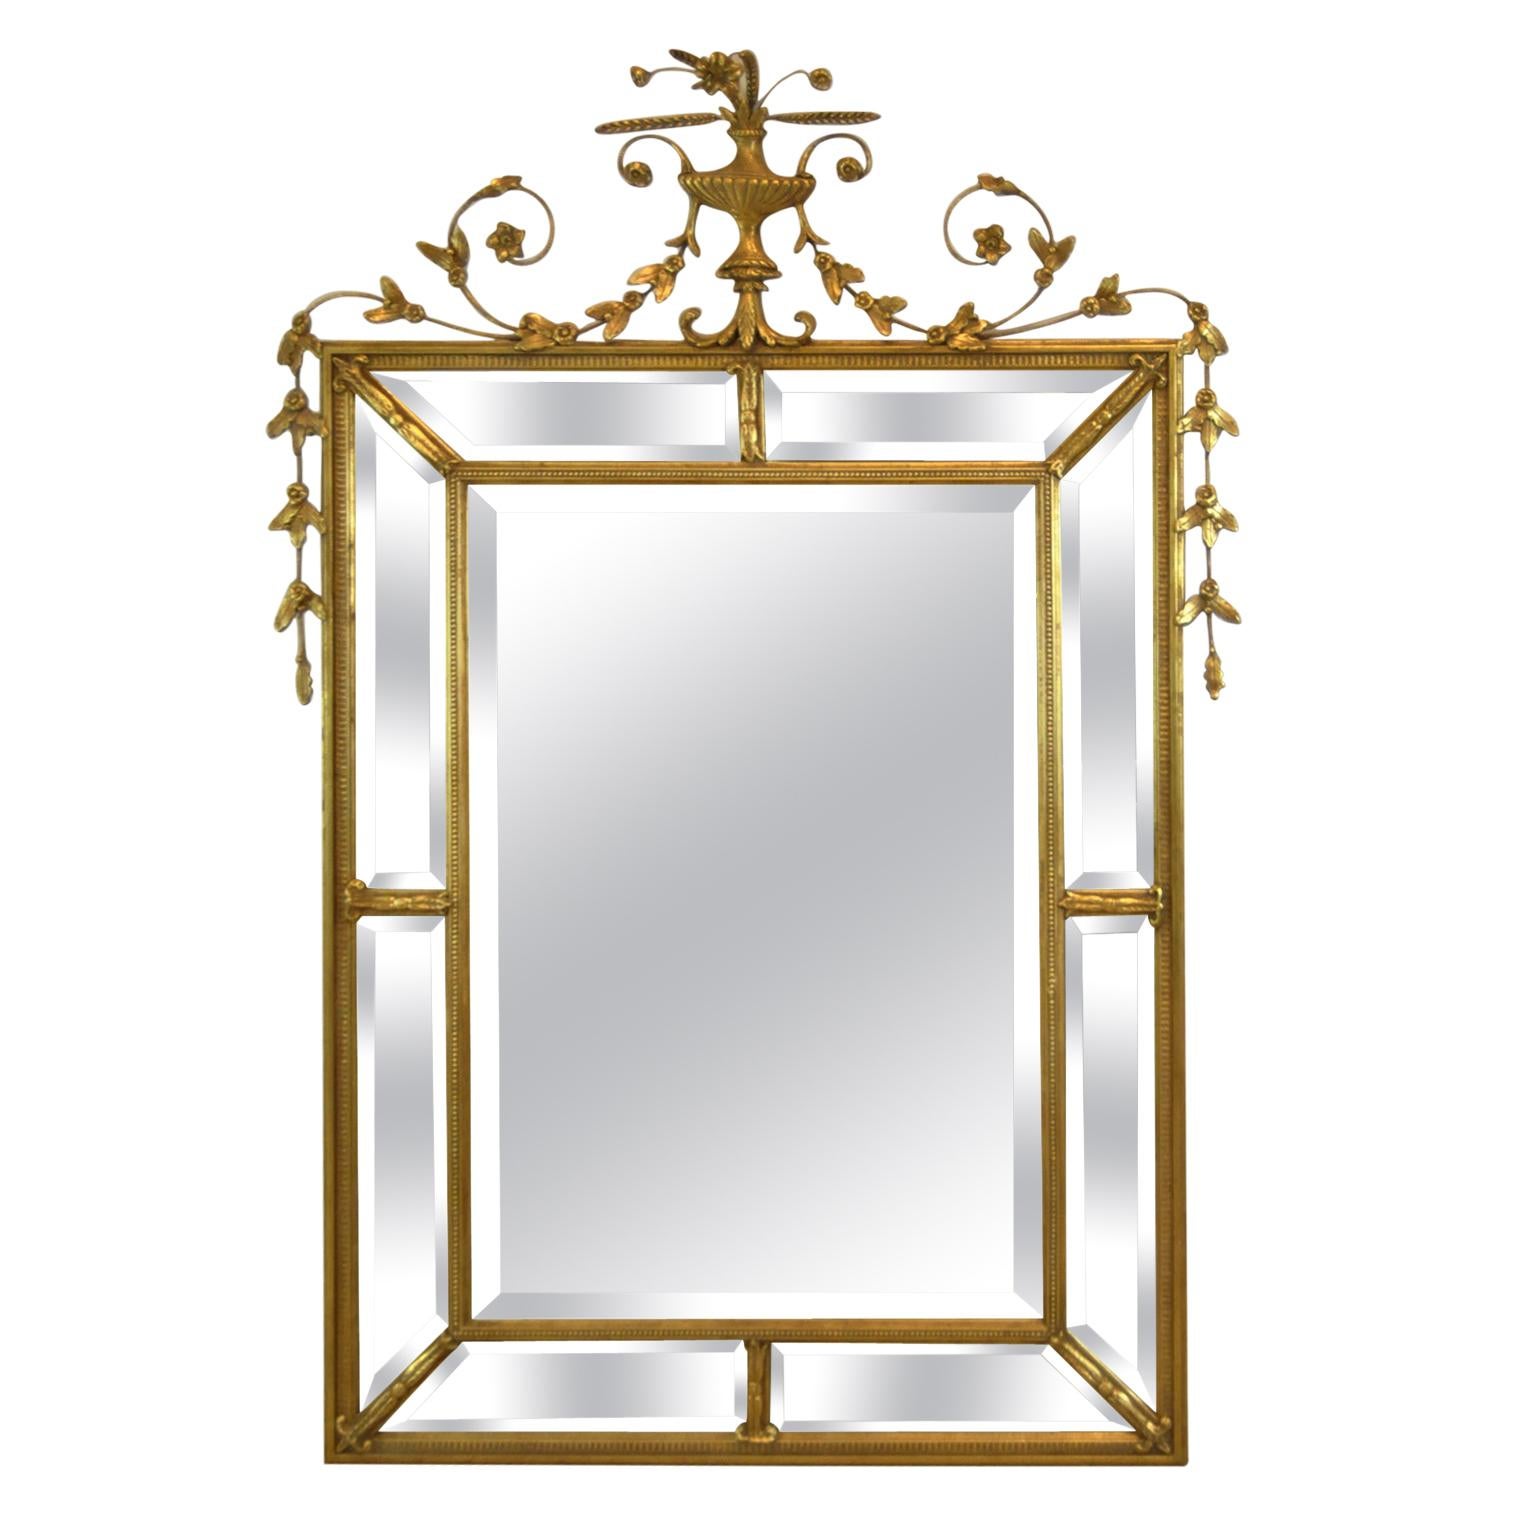 Baker Furniture Giltwood and Gesso Decorative Beveled Wall Mirror